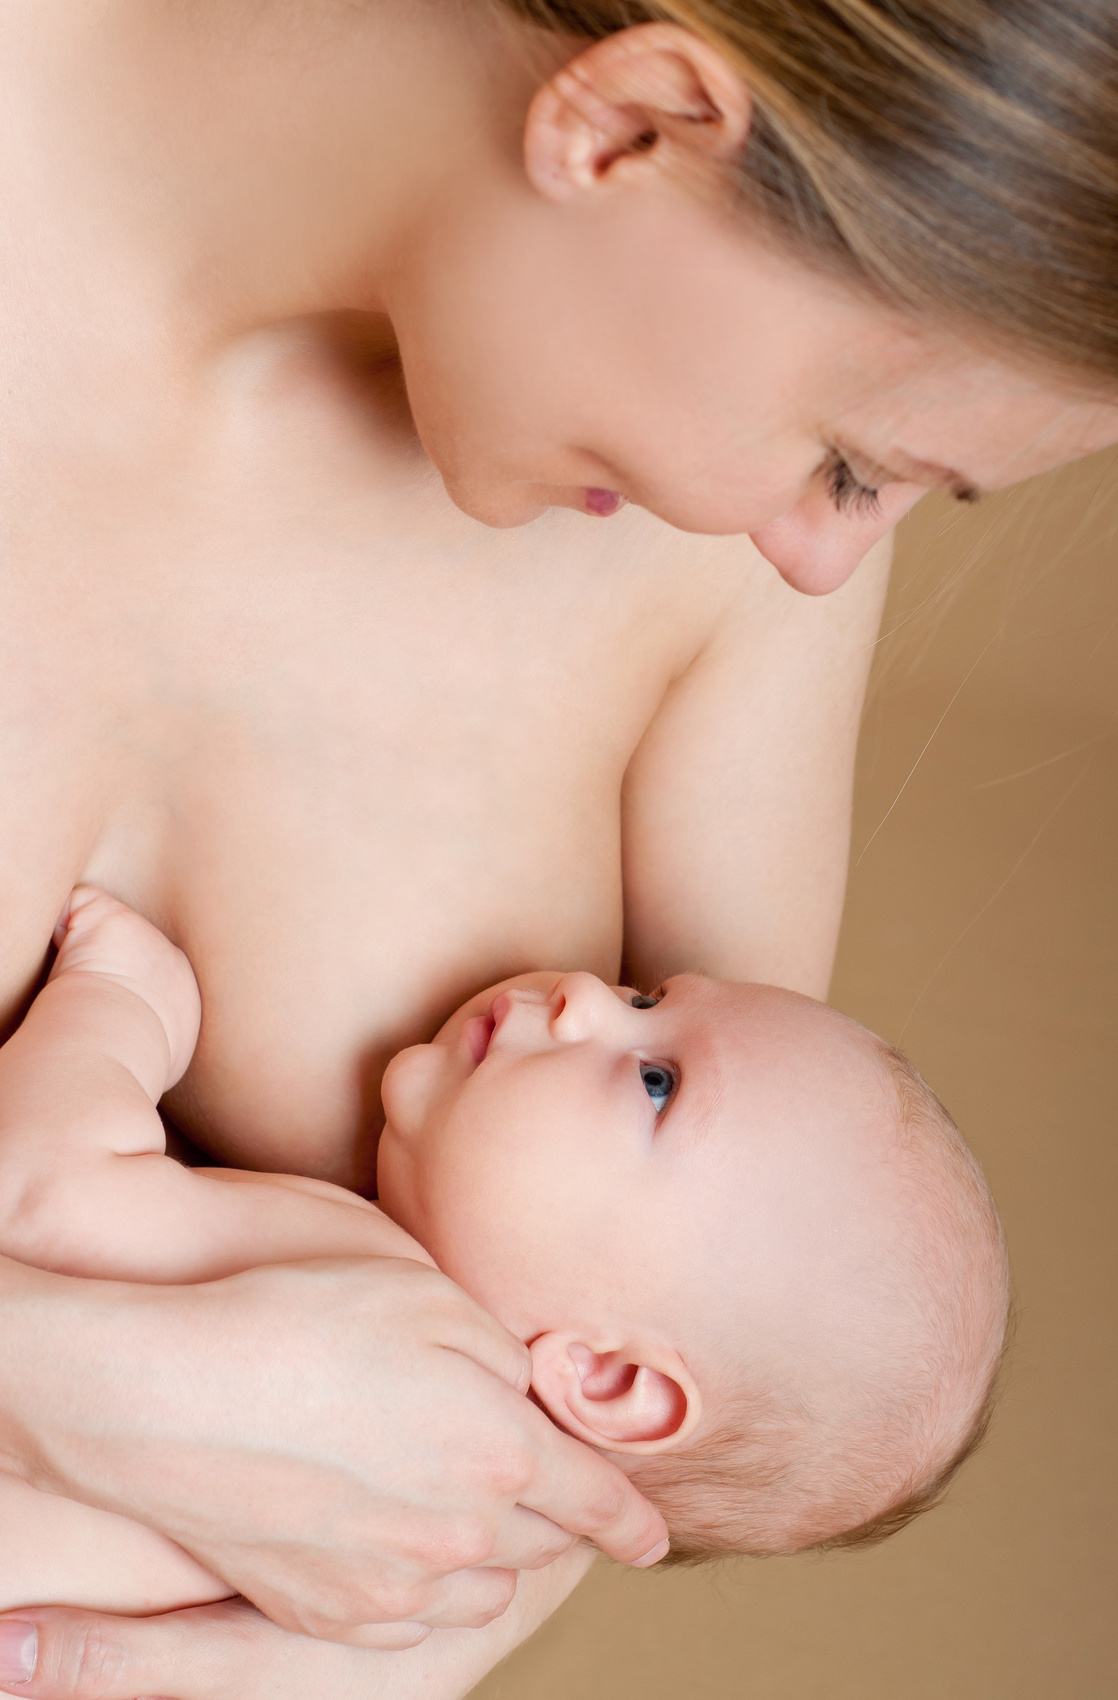 Mother breast feeding her infant